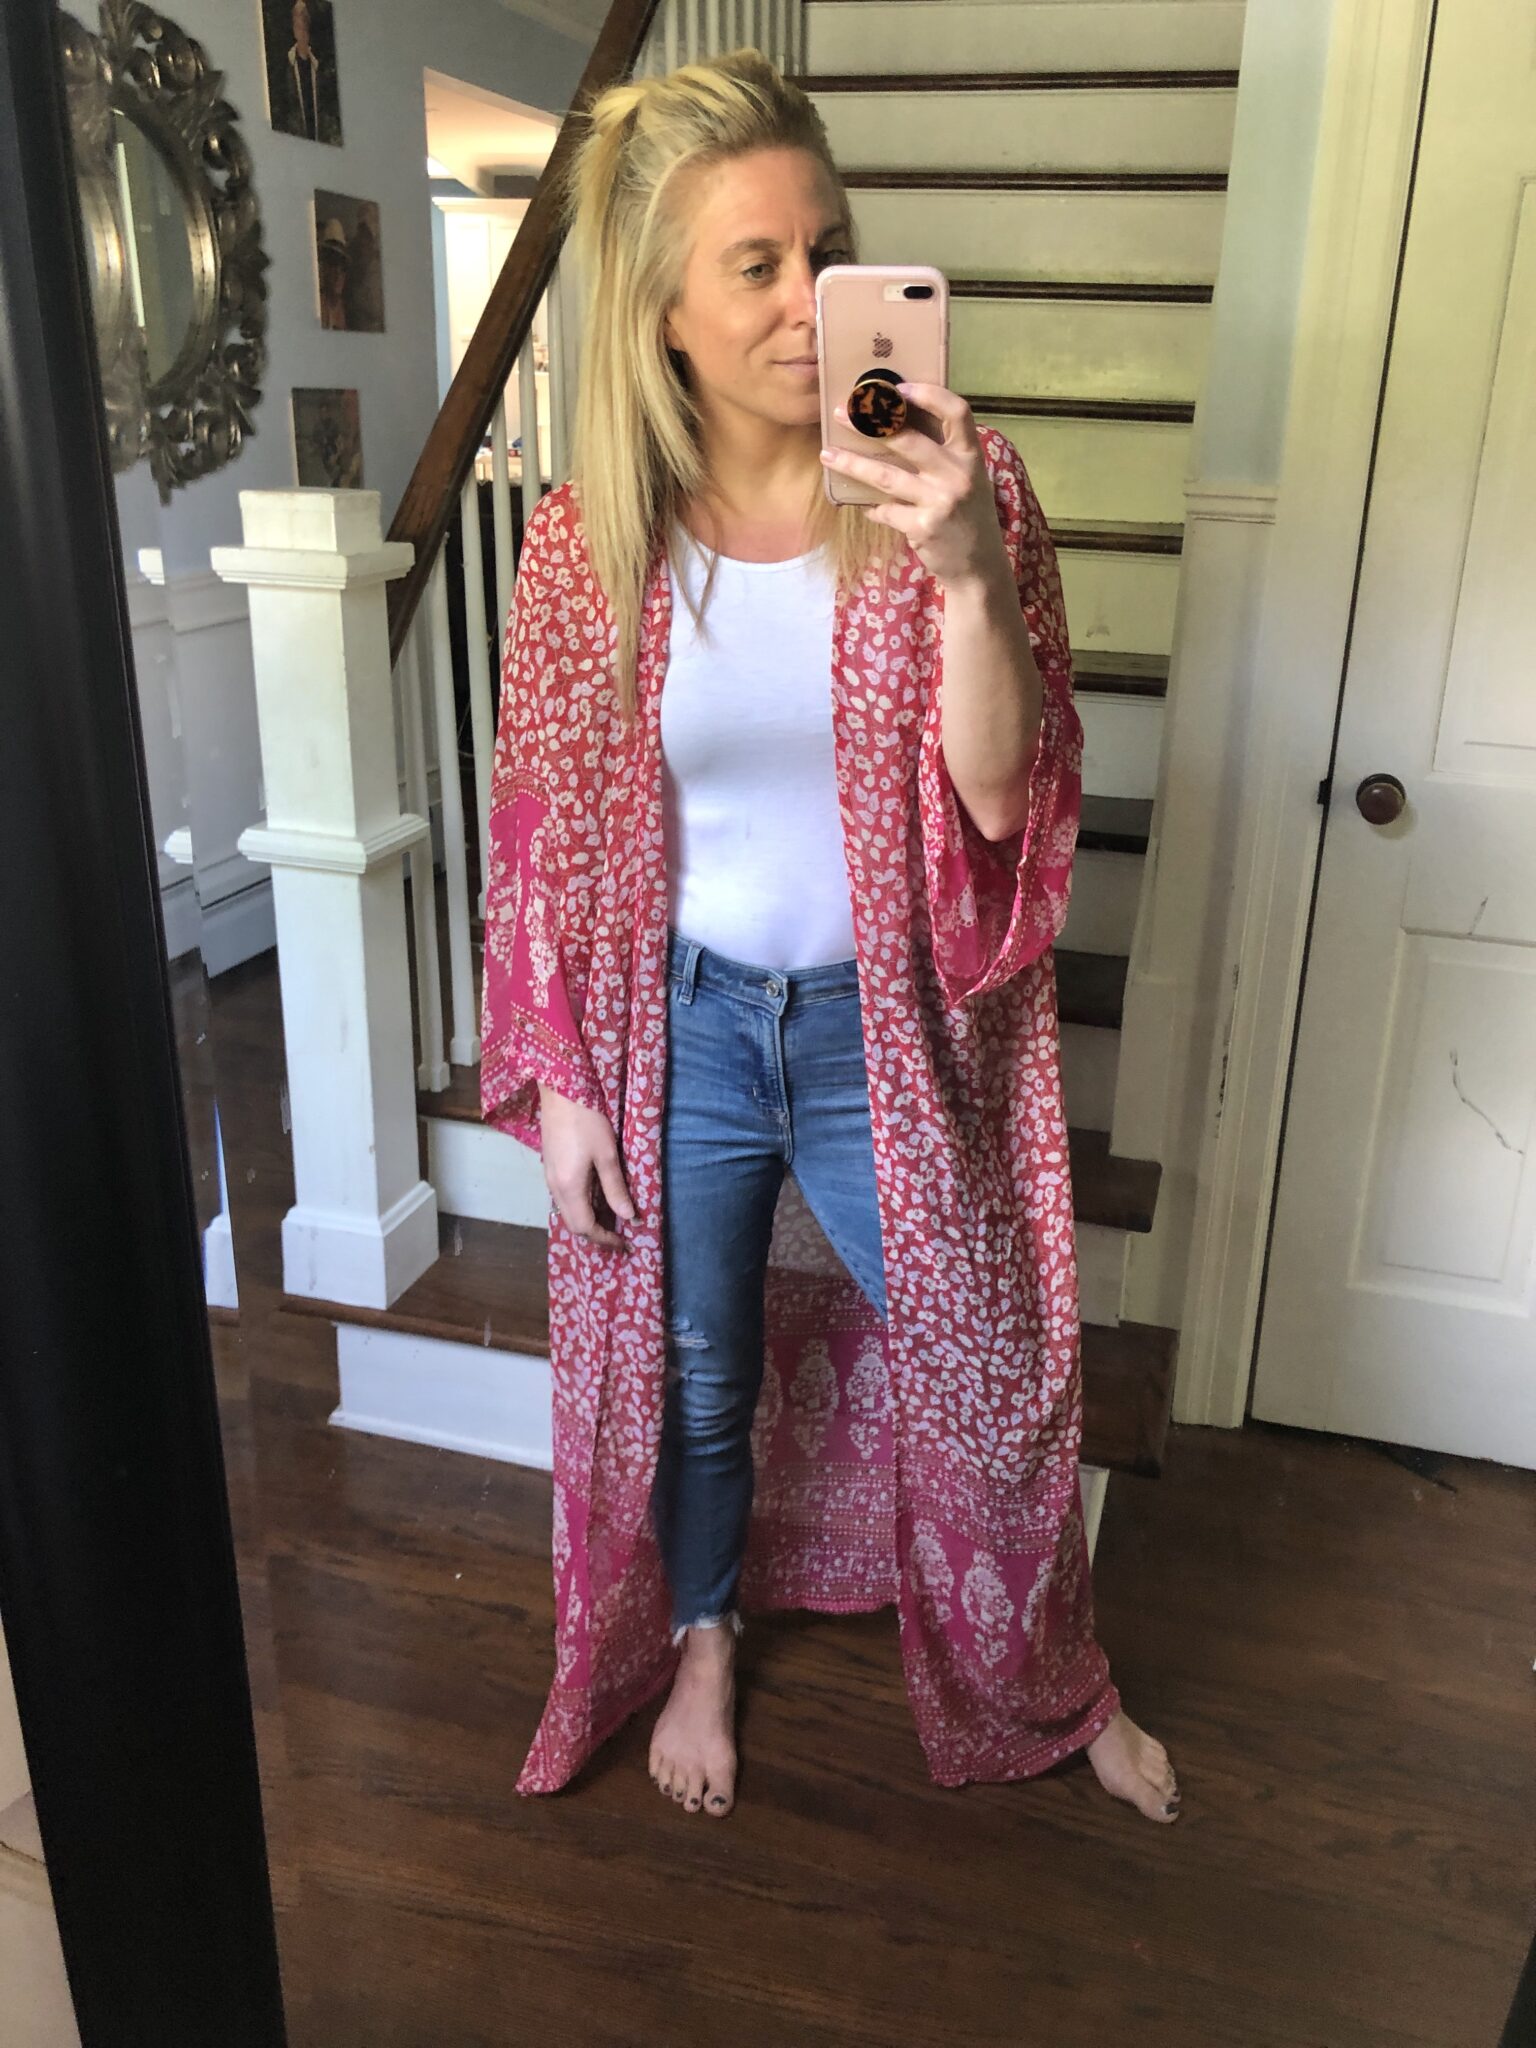 How to Wear a Kimono - 4 Ways to Style - Stylish Life for Moms